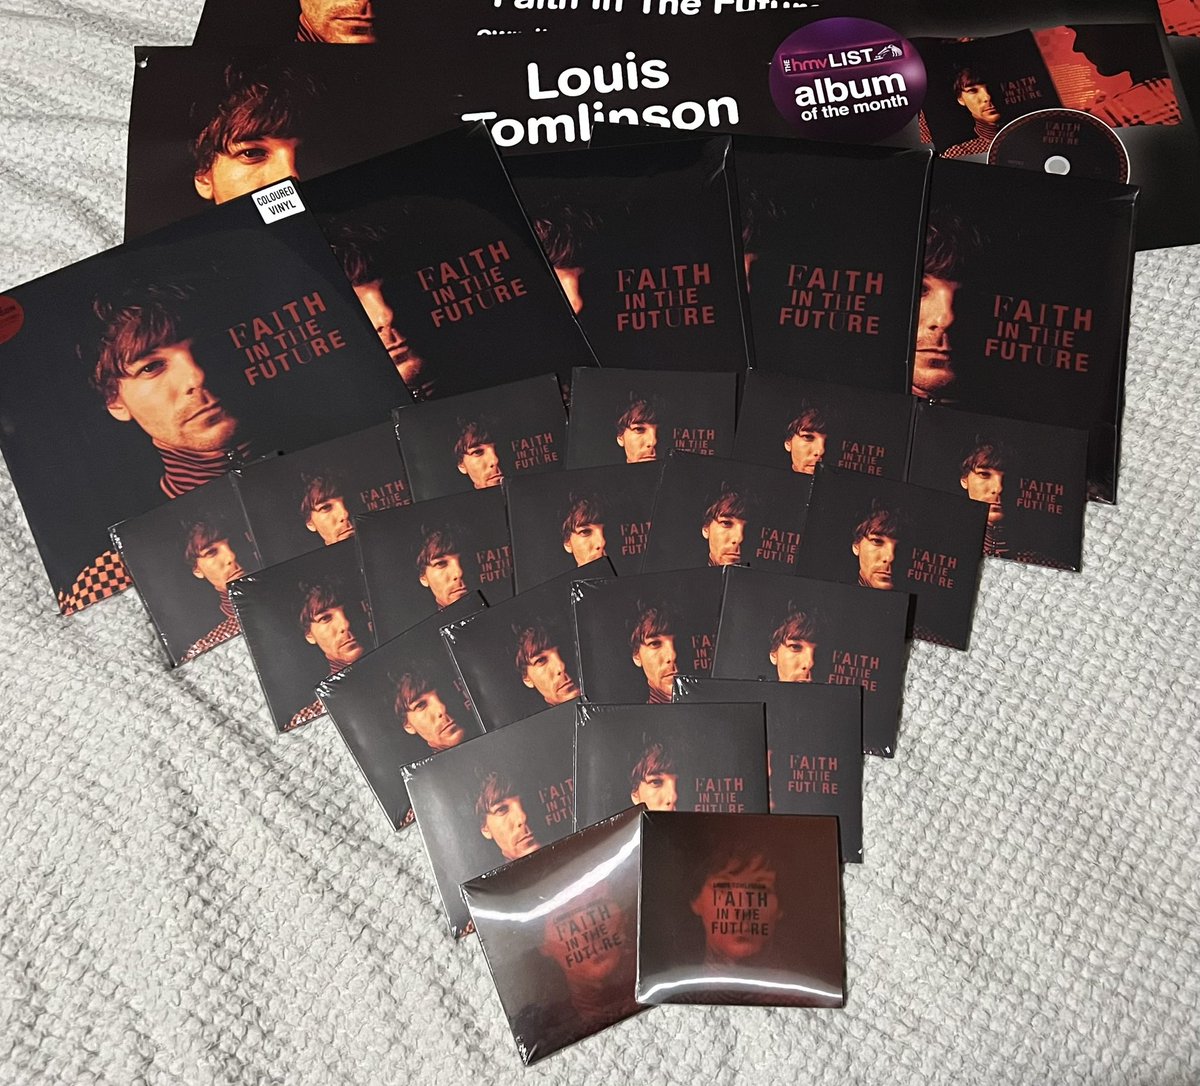 🚨|LOUIS TOMLINSON MERCH GIVEAWAY🚨

The winner will win the hoodie below and a faith in the future vinyl or CD!!

RULES:
- follow me turn on my notification 📢 
- must be like and rt
- comment your fav song of Louis

this ends in 2 days! good luck loves!!
(For more chances)